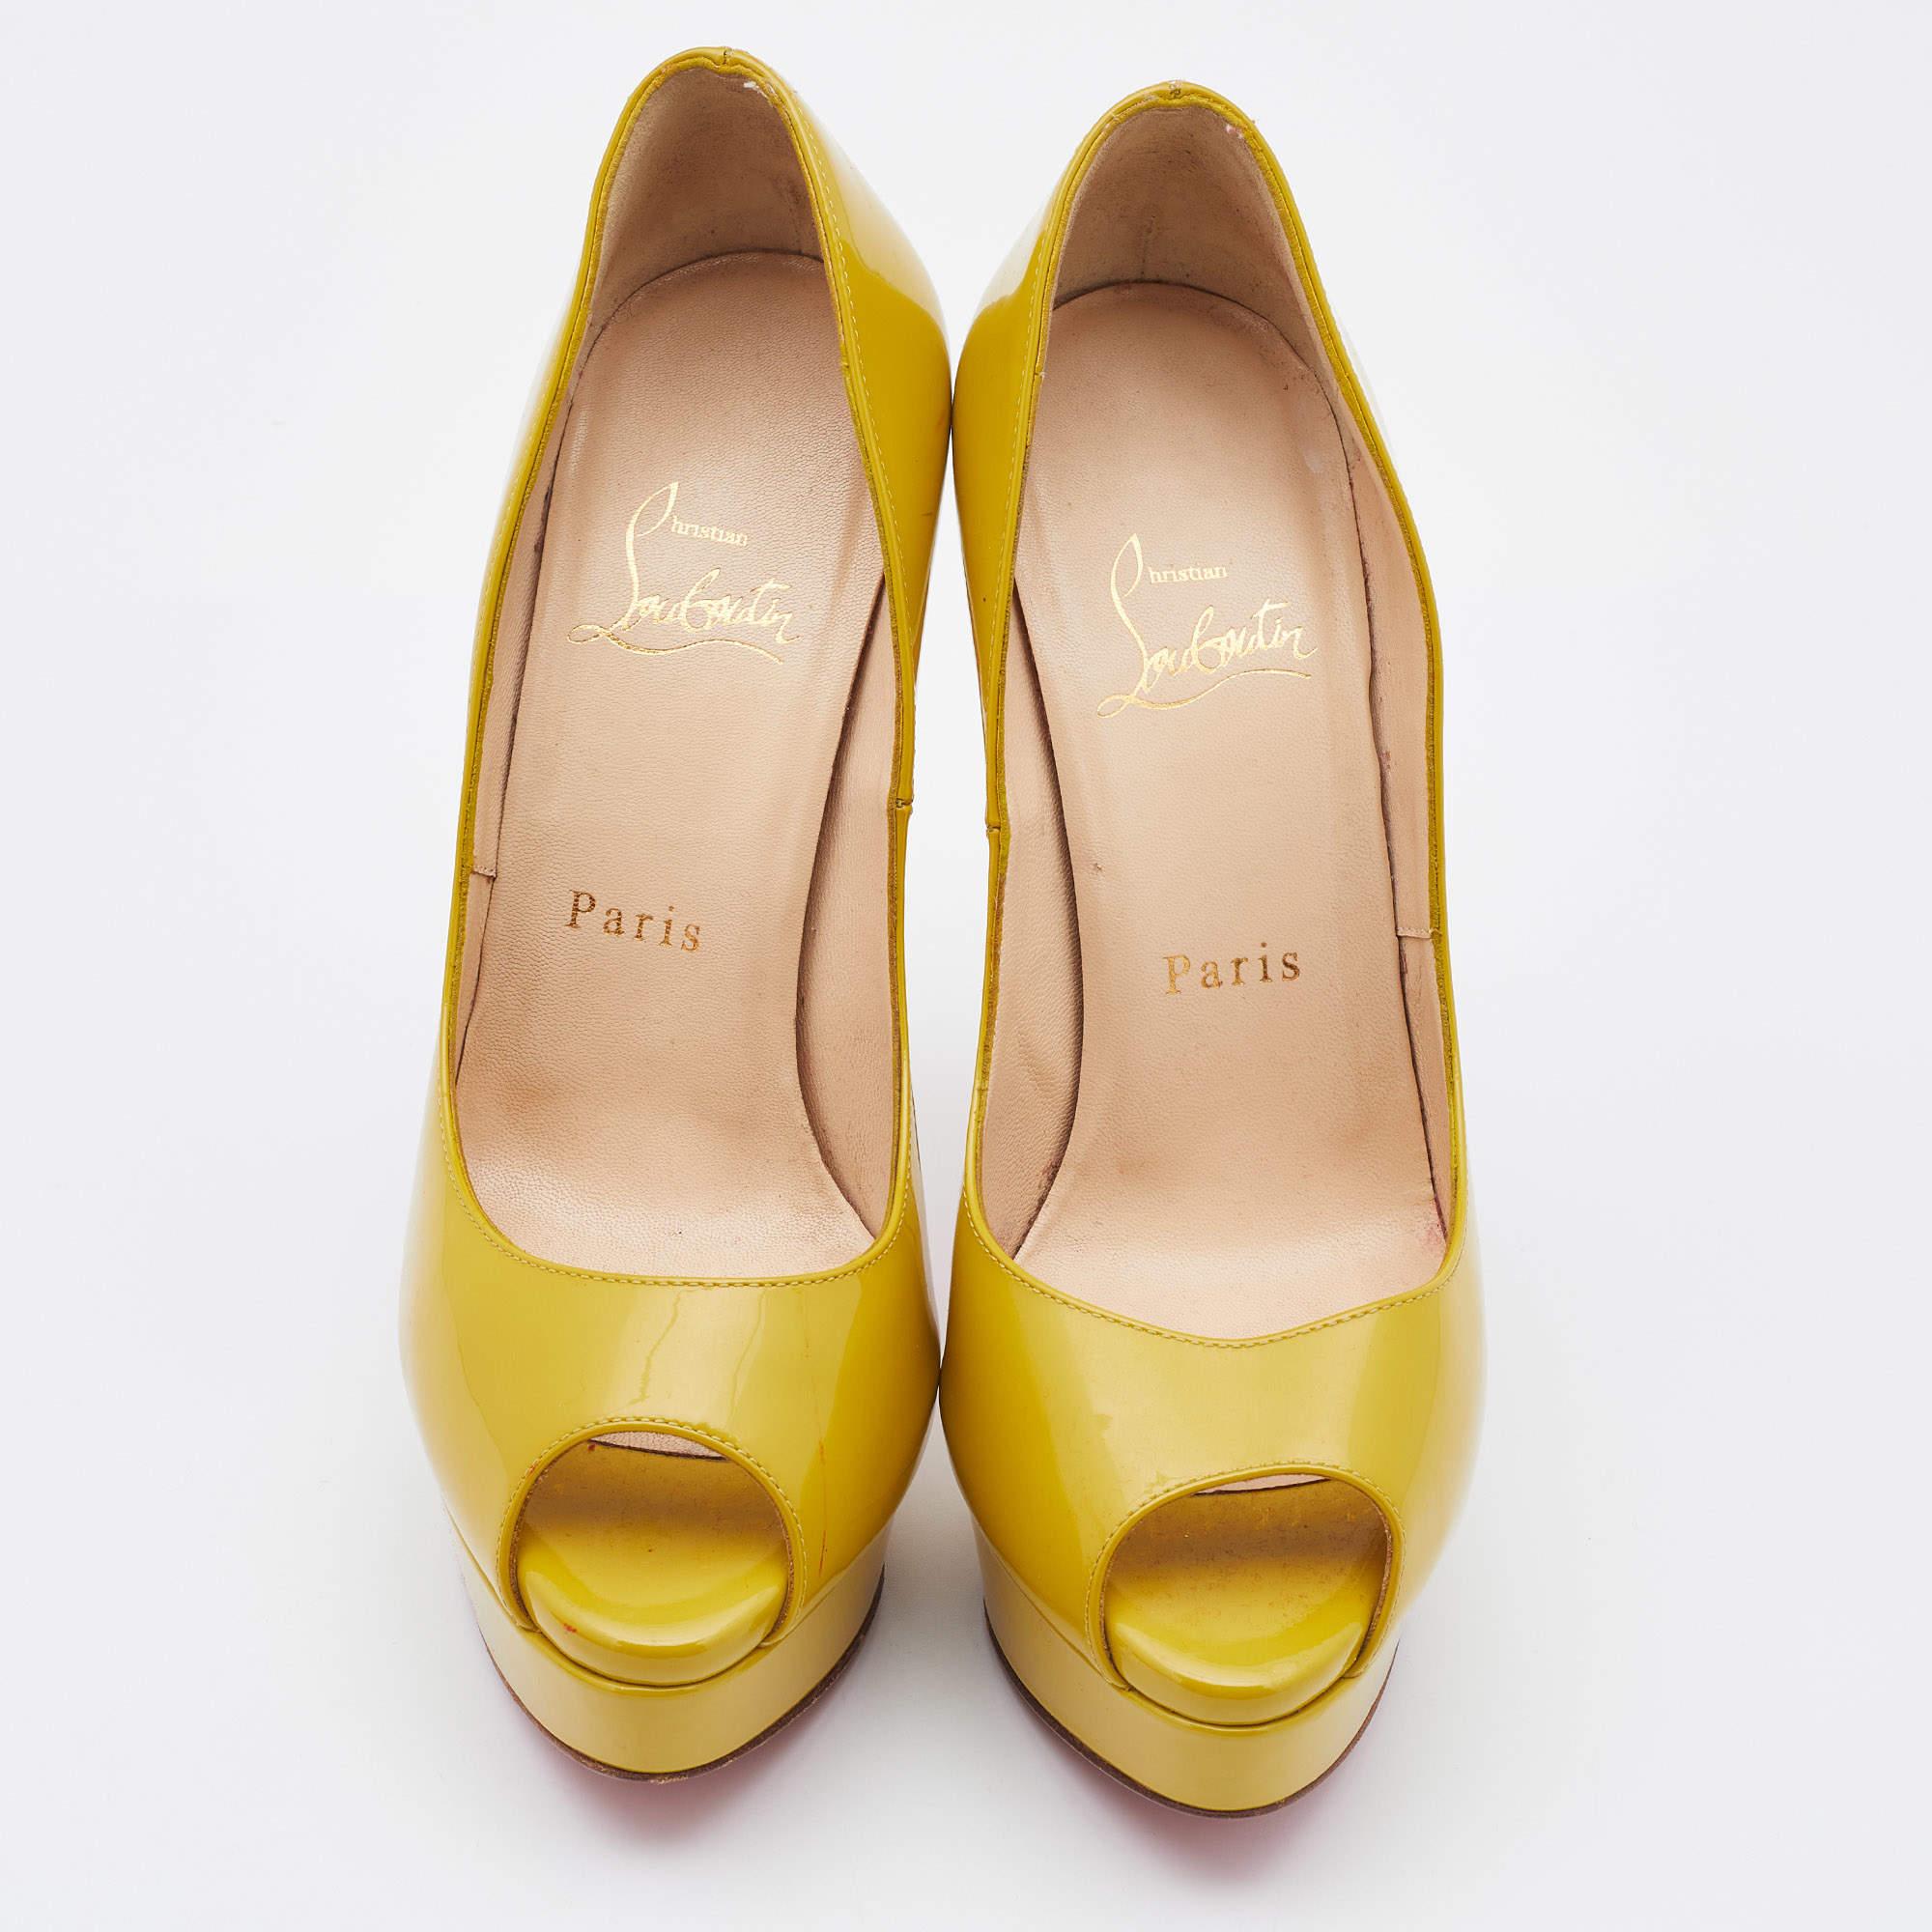 Christian Louboutin Mustard Patent Leather Lady Peep Toe Pumps Size 36 For Sale 3